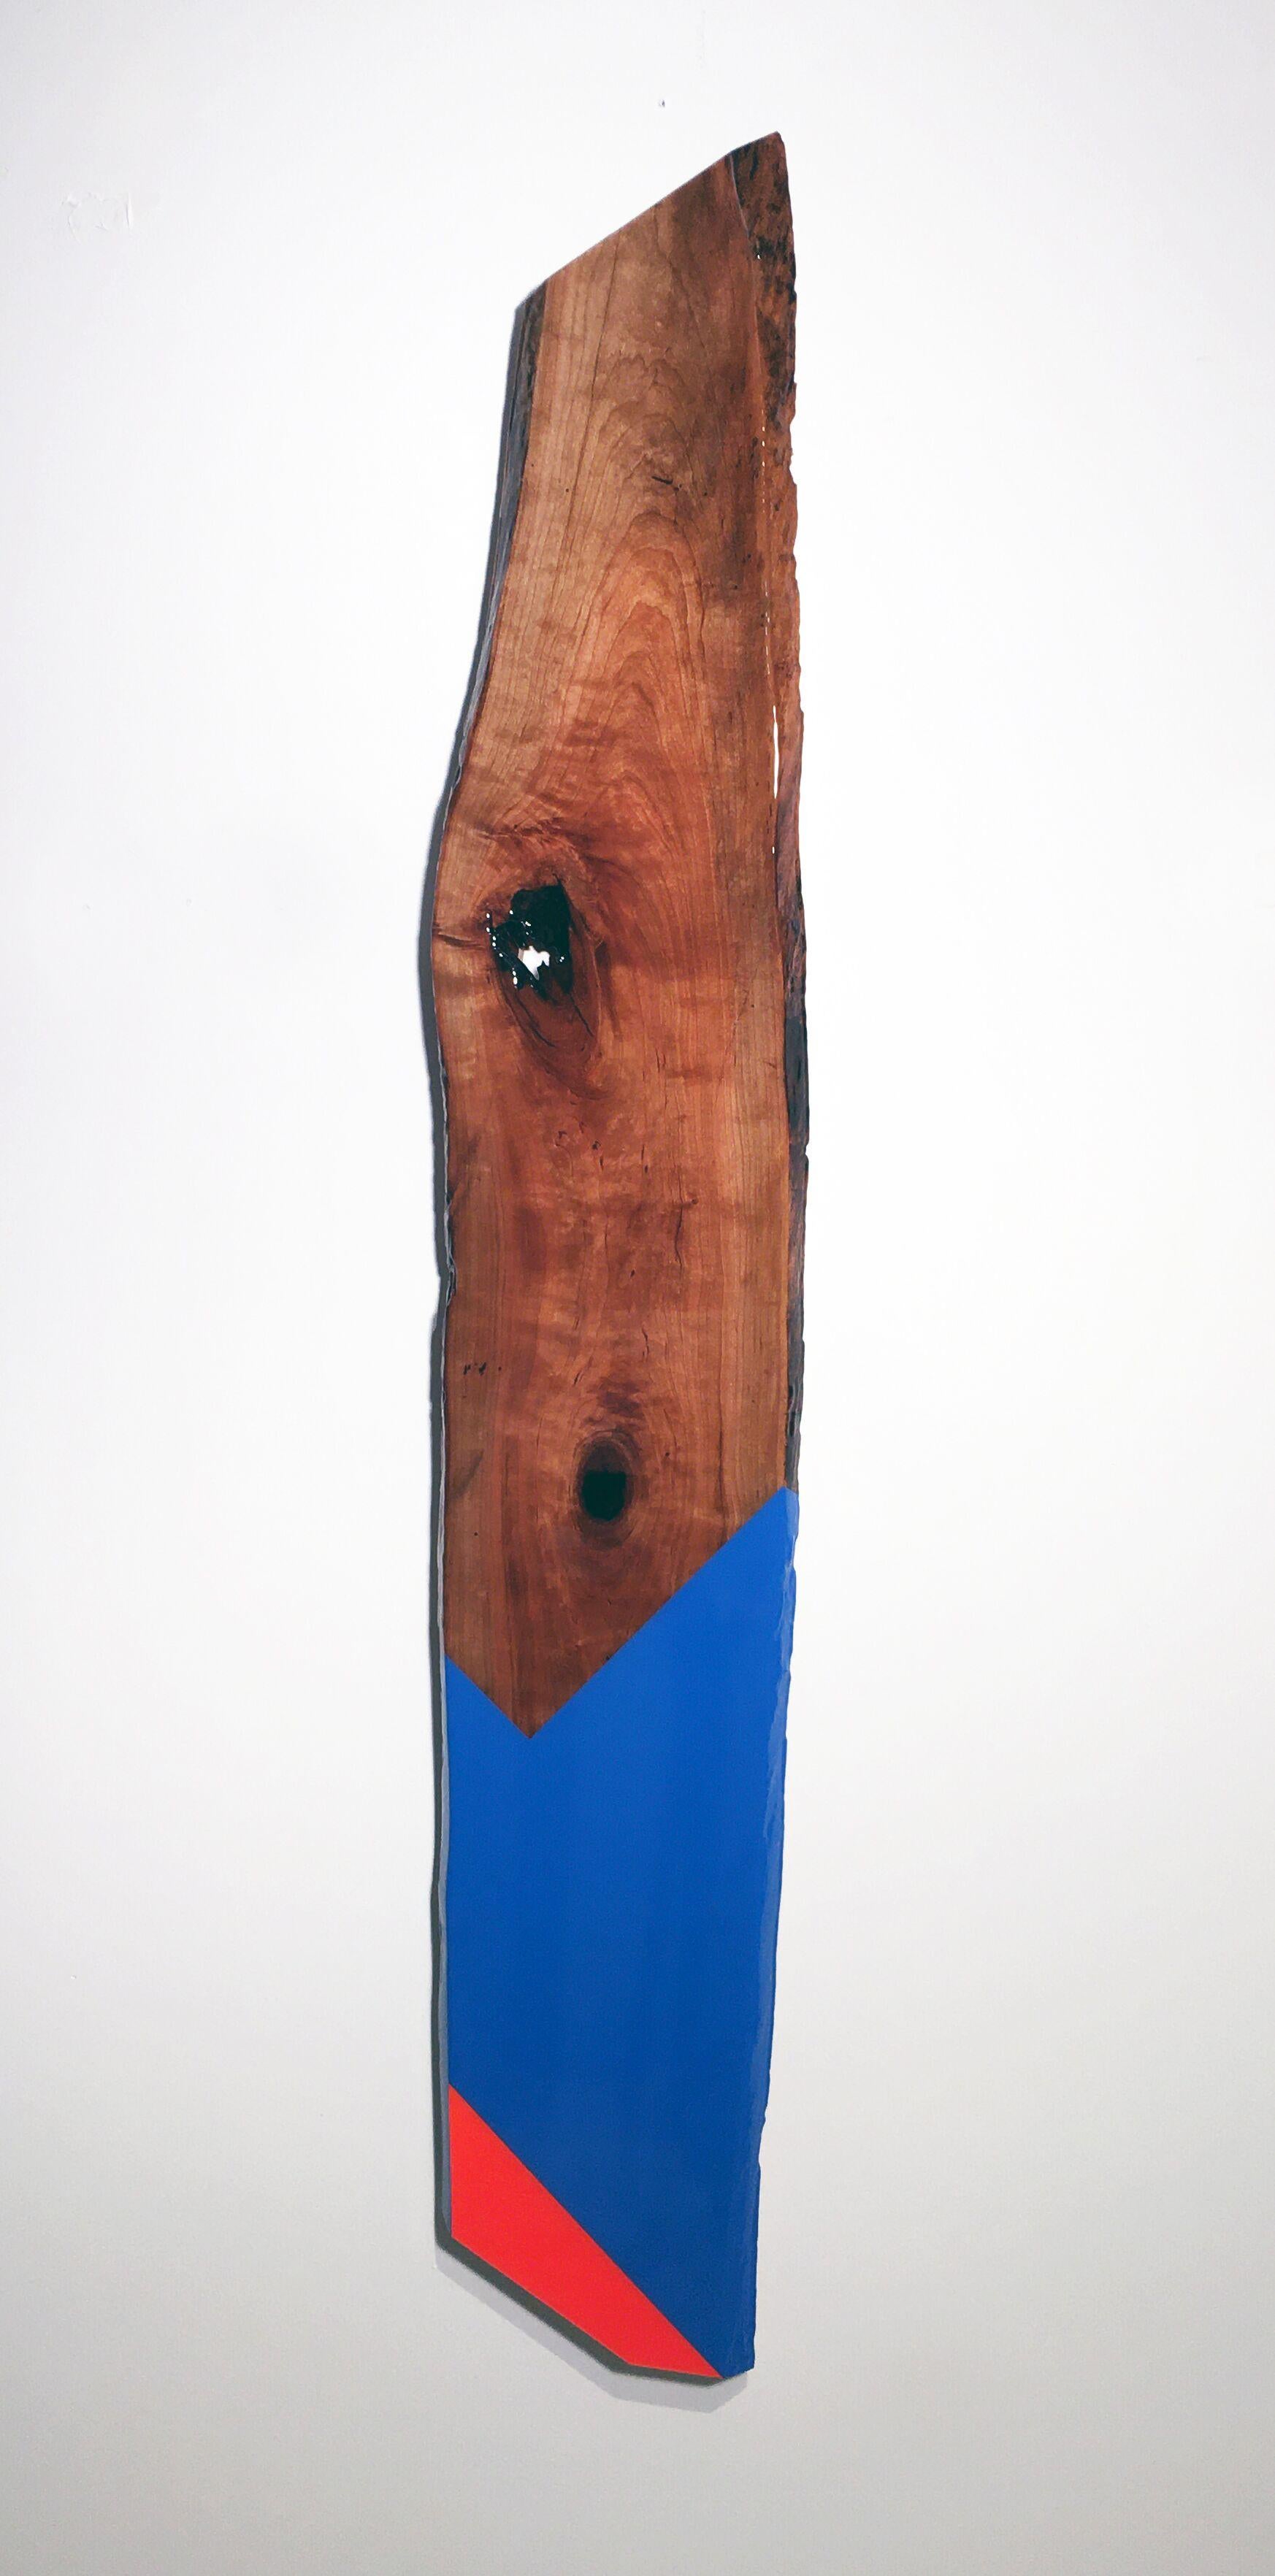 David E. Peterson Abstract Sculpture – "Leaner 68"